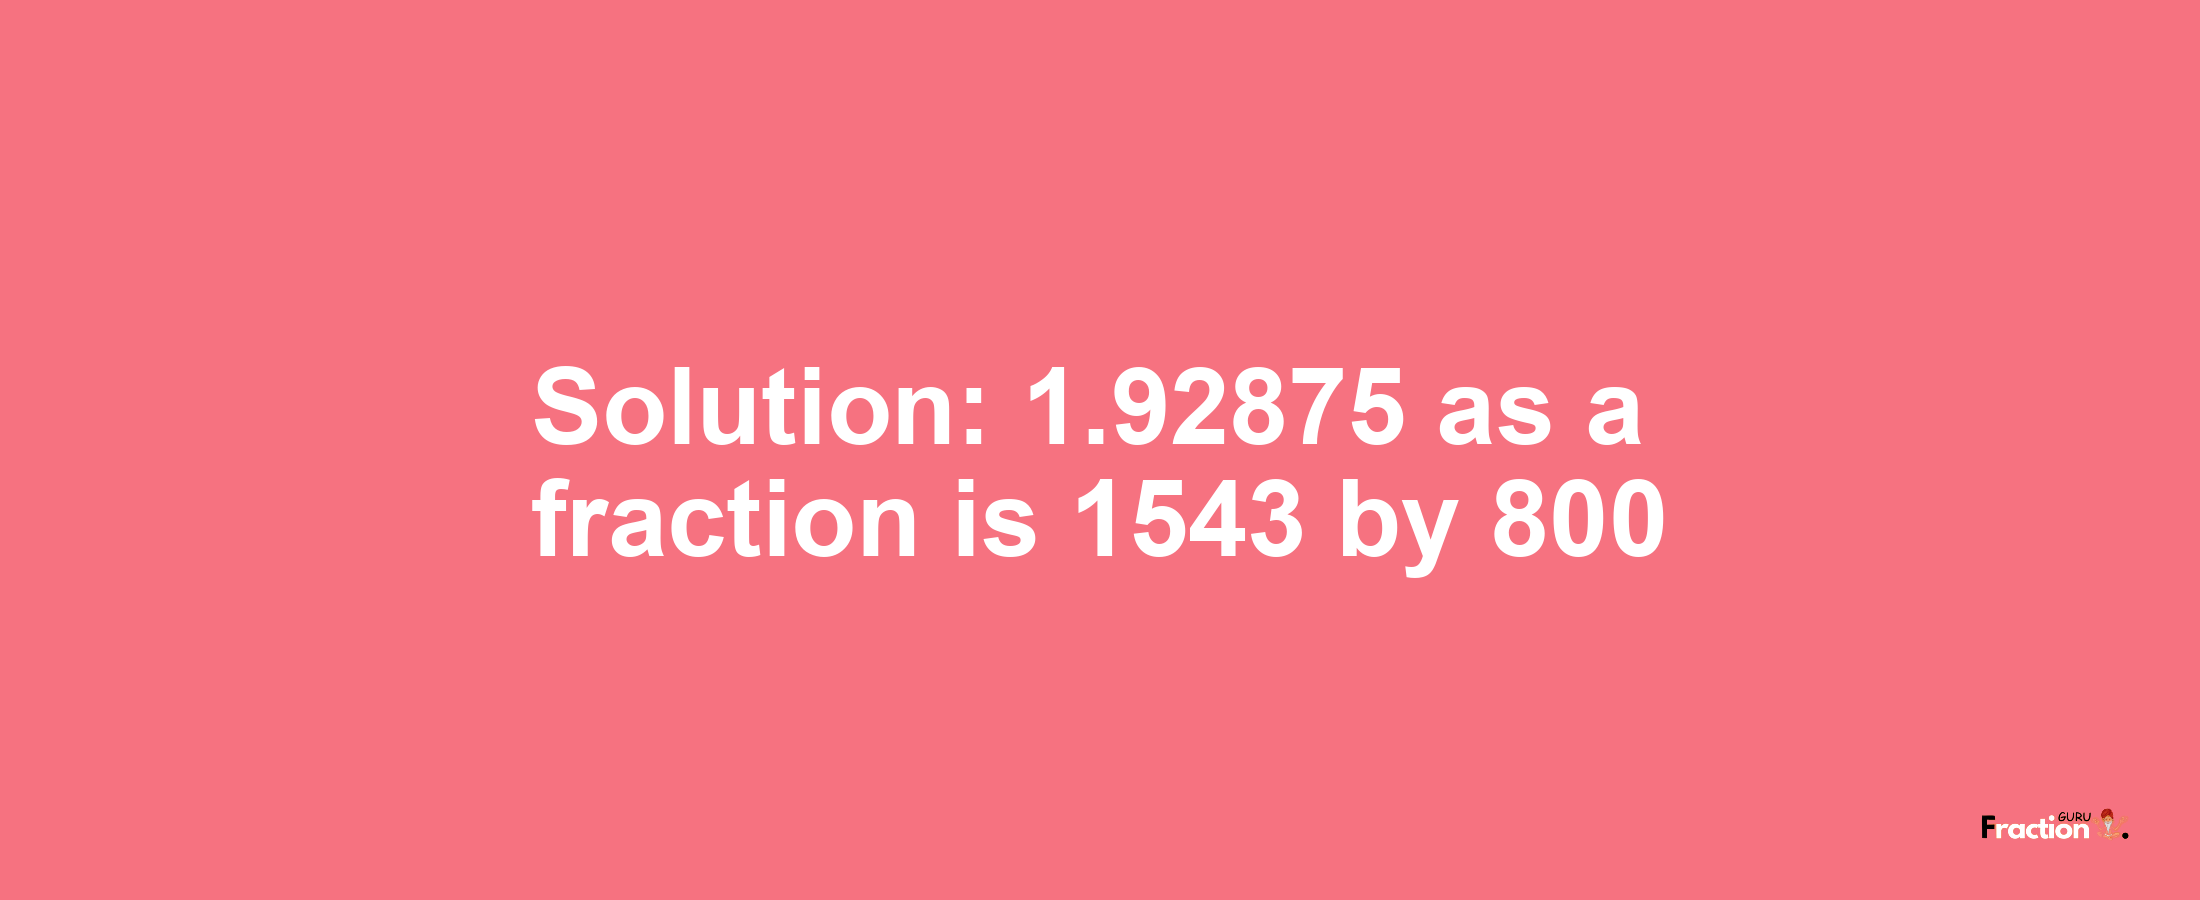 Solution:1.92875 as a fraction is 1543/800